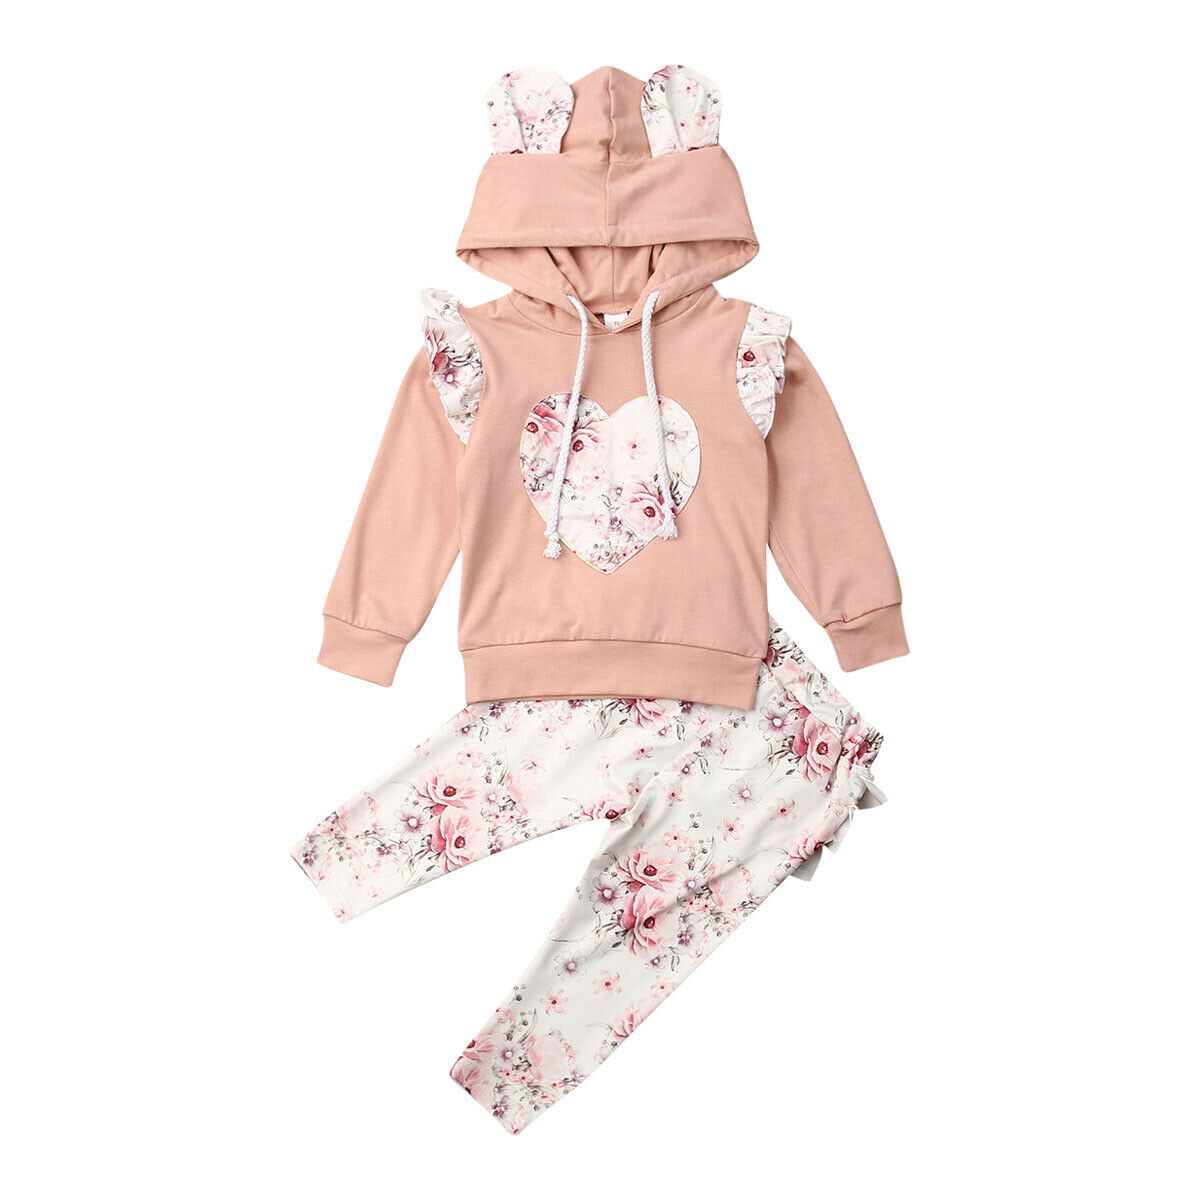 Details about   Toddler Baby Infant Girls Clothes Floral Hooded Tops Pants Outfits Set Tracksuit 